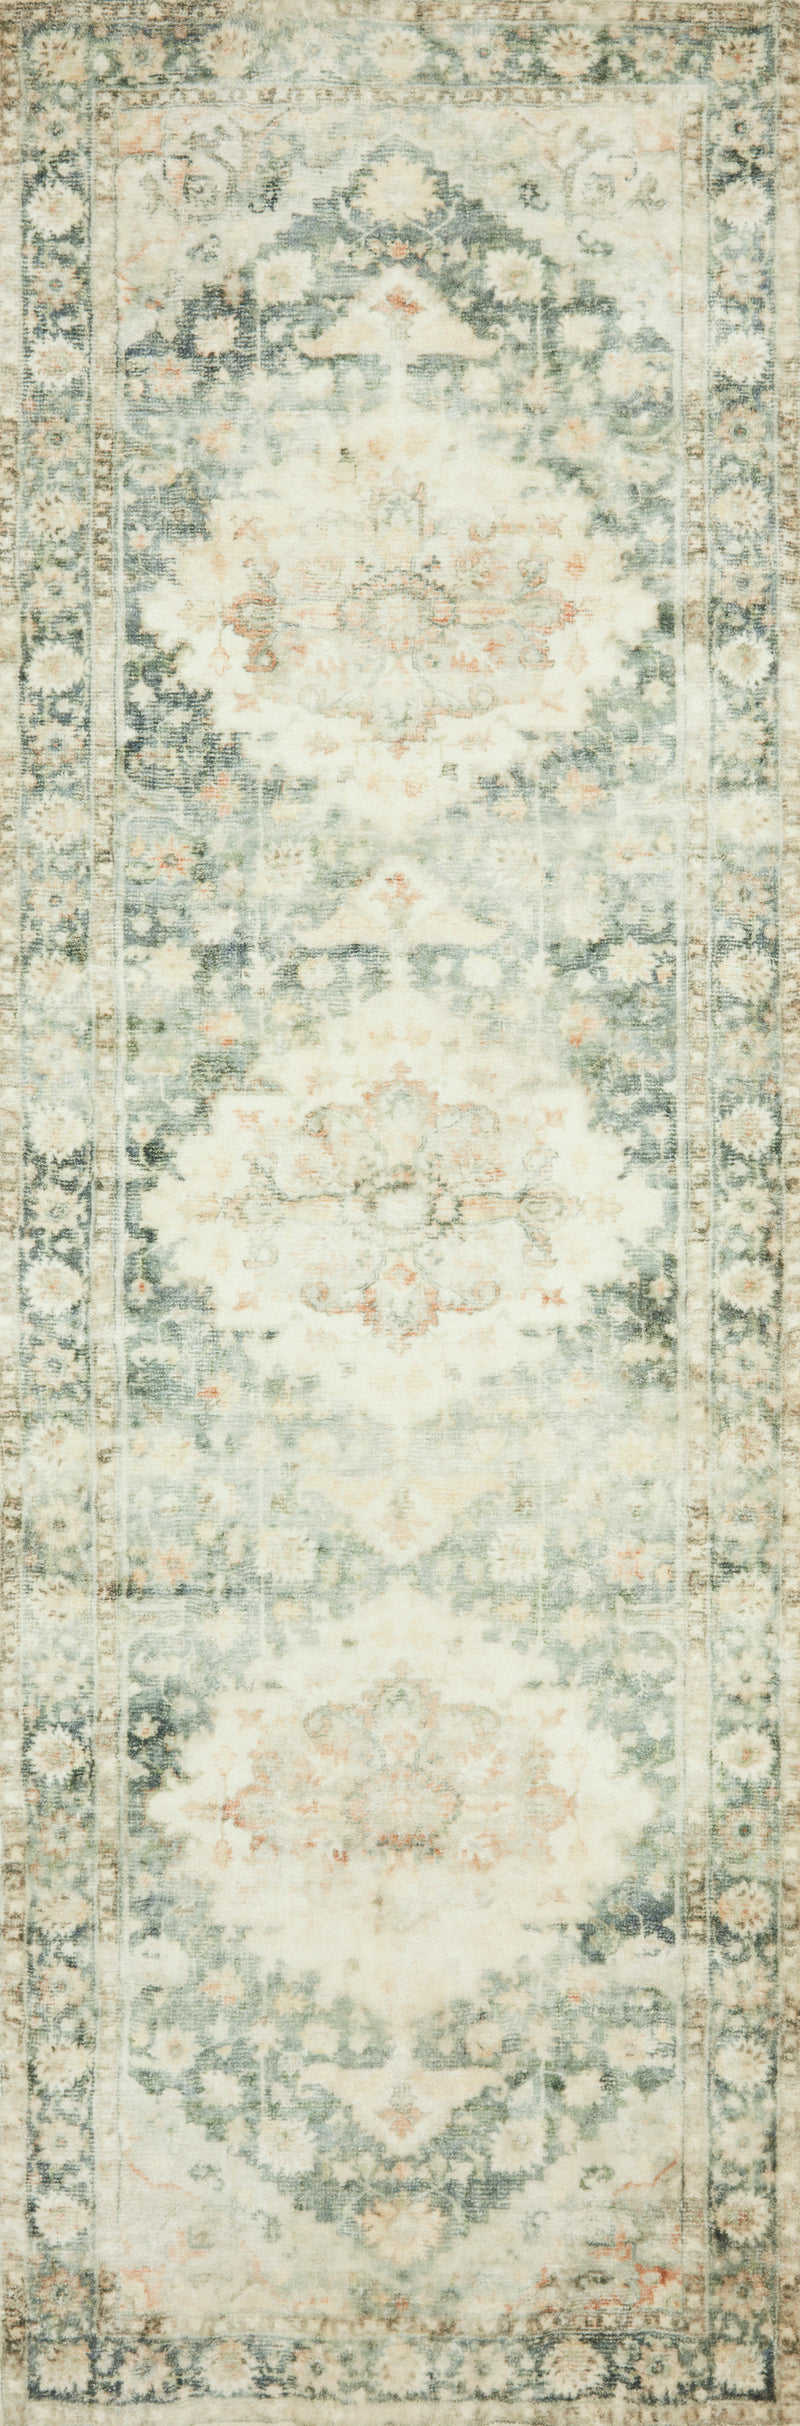 media image for Rosette Rug in Teal / Ivory by Loloi II 210